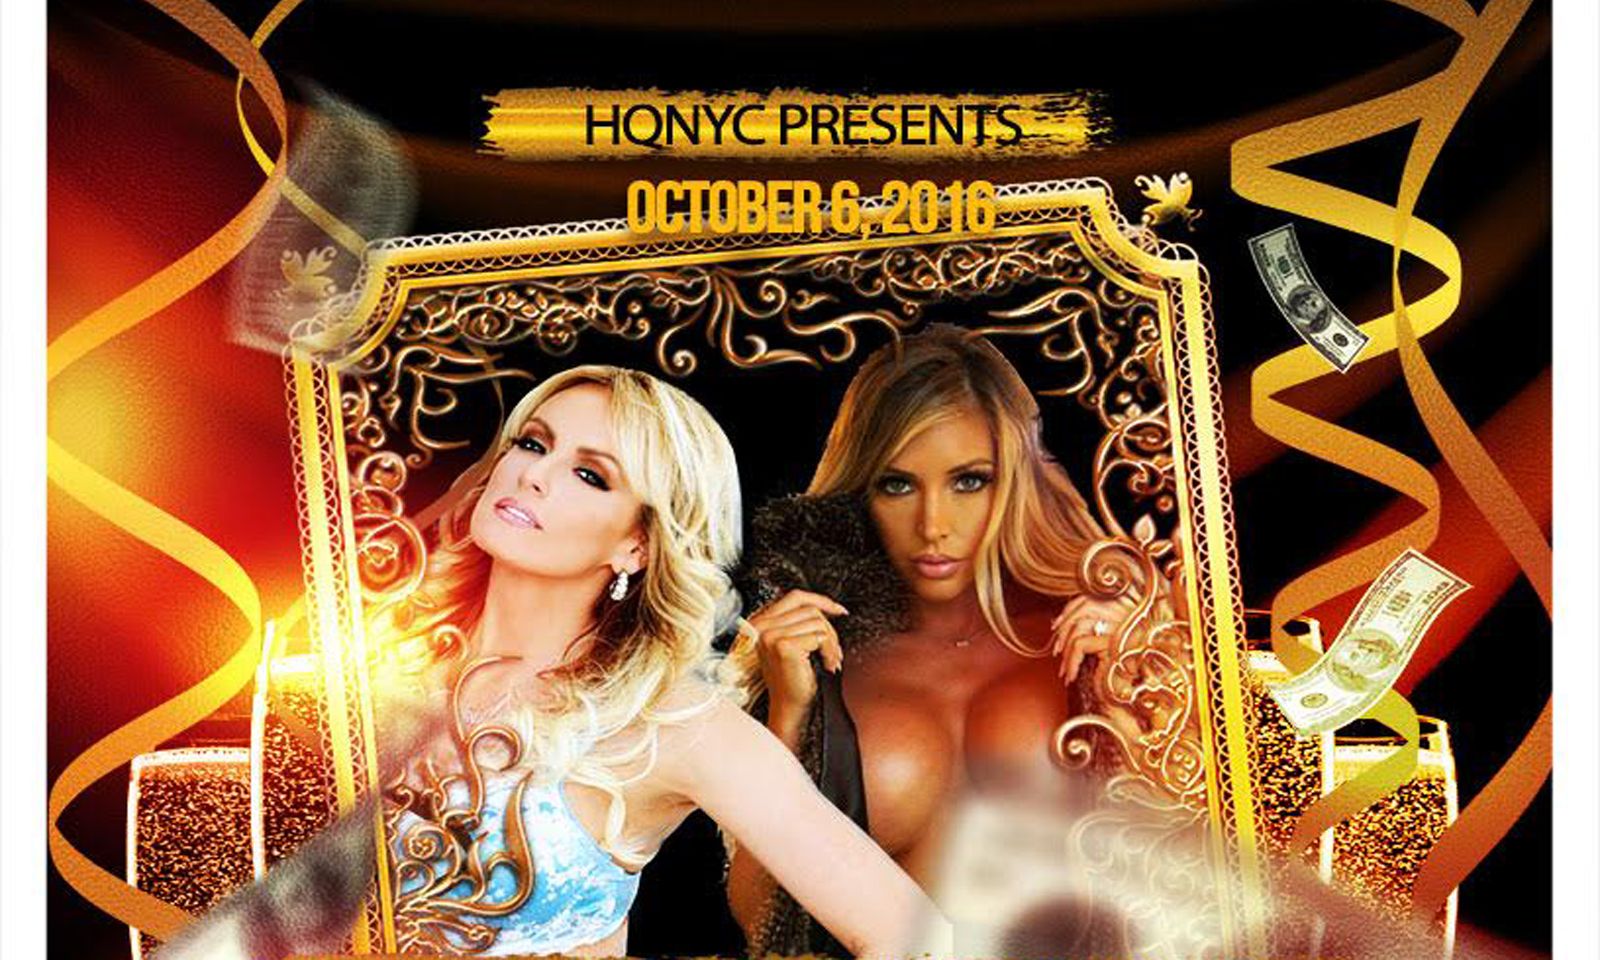 HQNYC Celebrates 11th Anniversary with Hosts Stormy Daniels and Samantha Saint